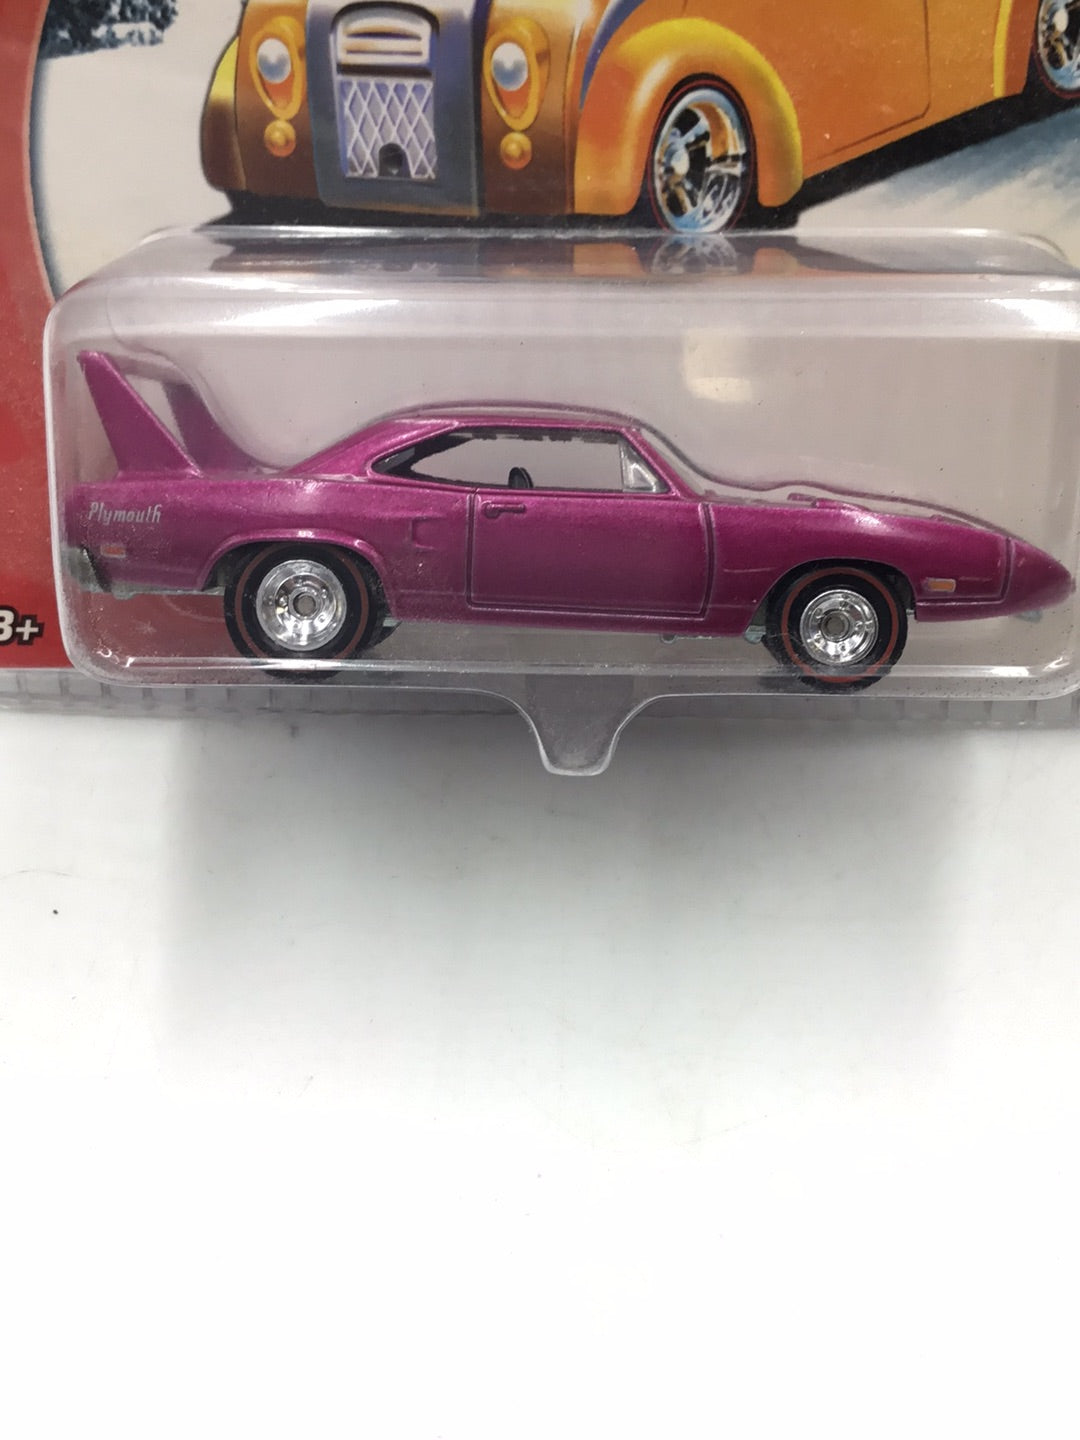 Hot wheels 2006 holiday rods #4 70 Plymouth Superbird Real riders NN6